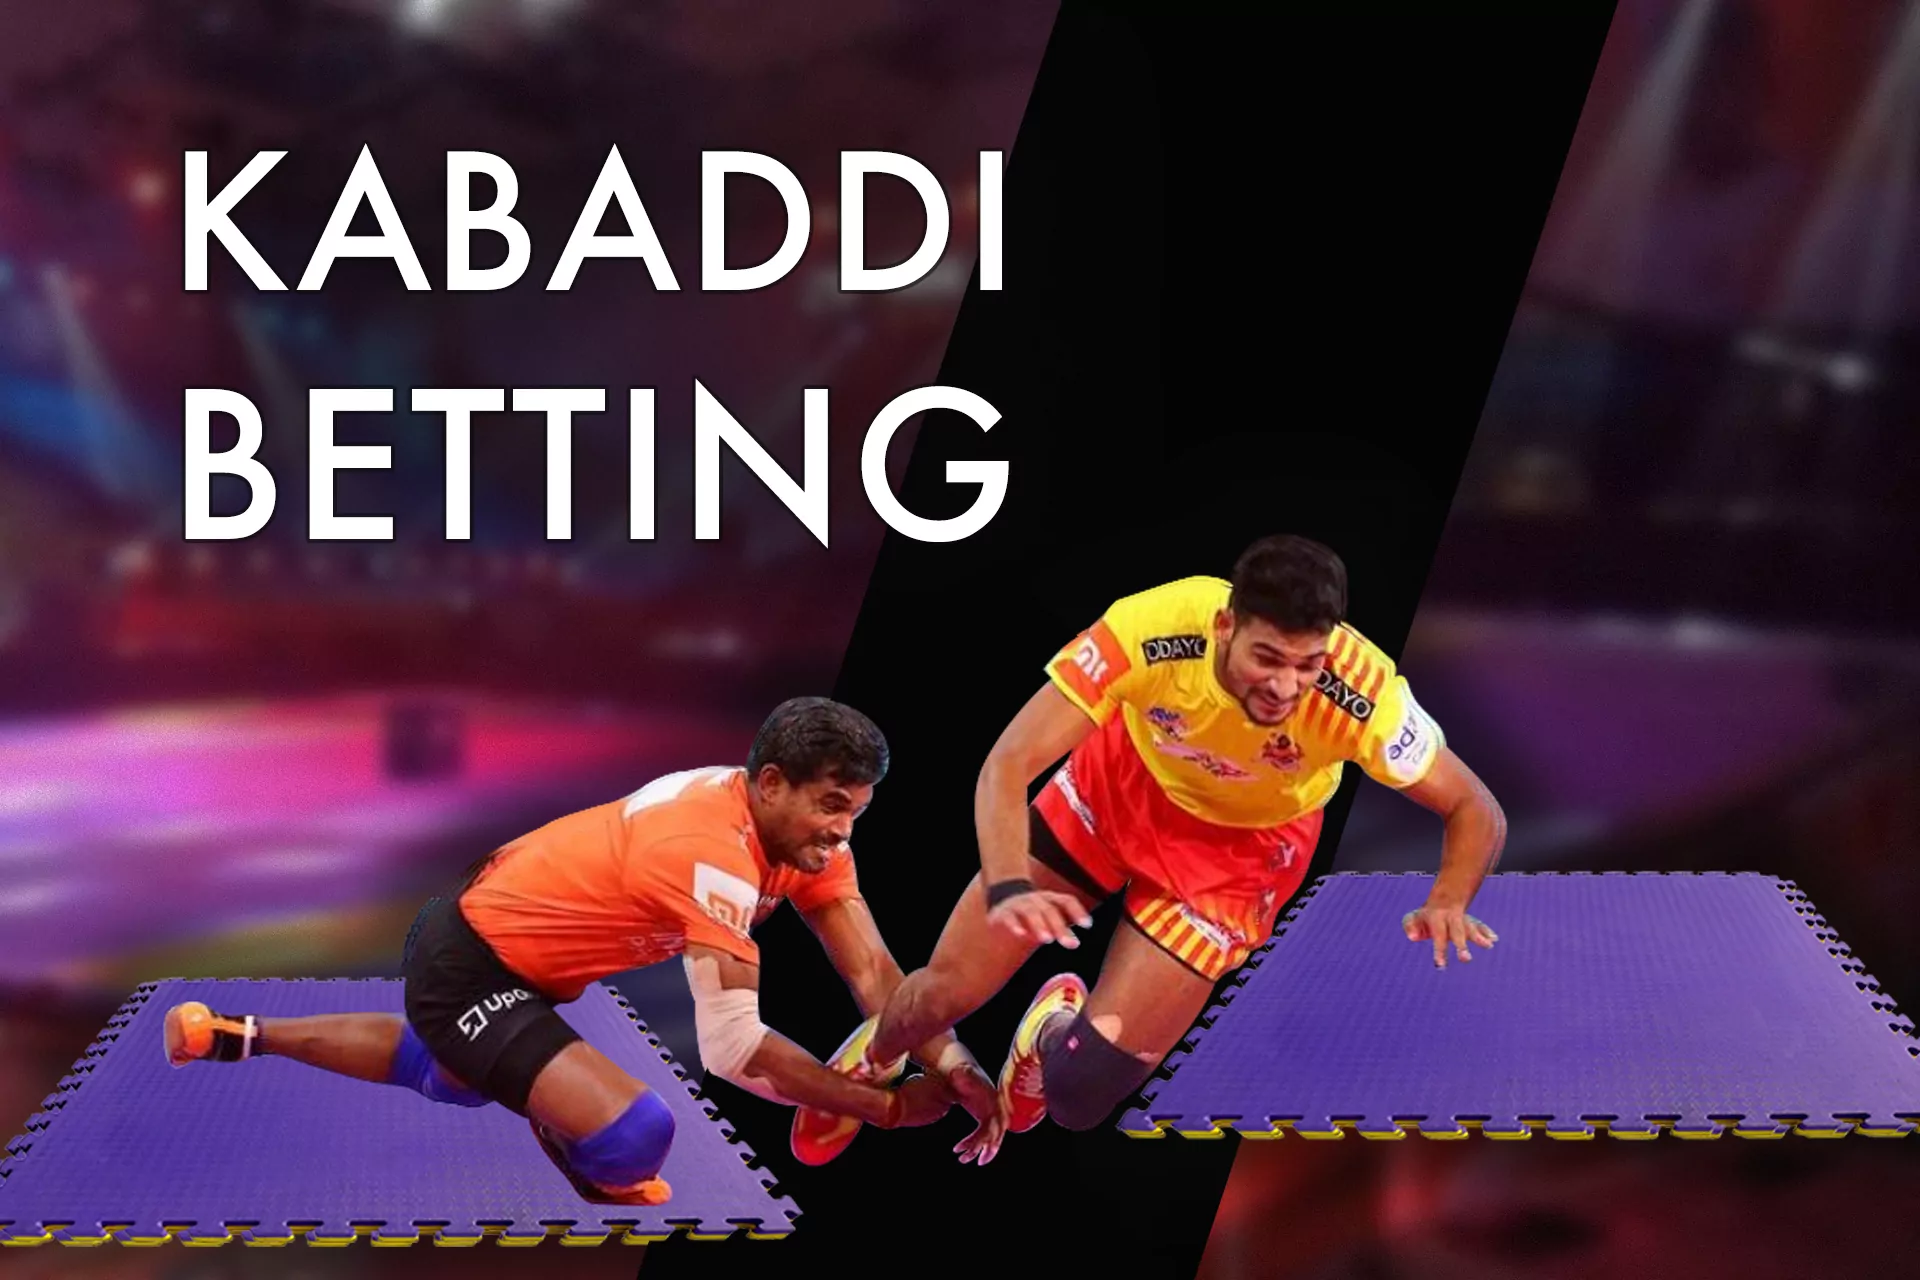 Kabaddi isn't spread all over the world so you should pay attention to the Asian bookmaker offices if you want to place a bet on its event.